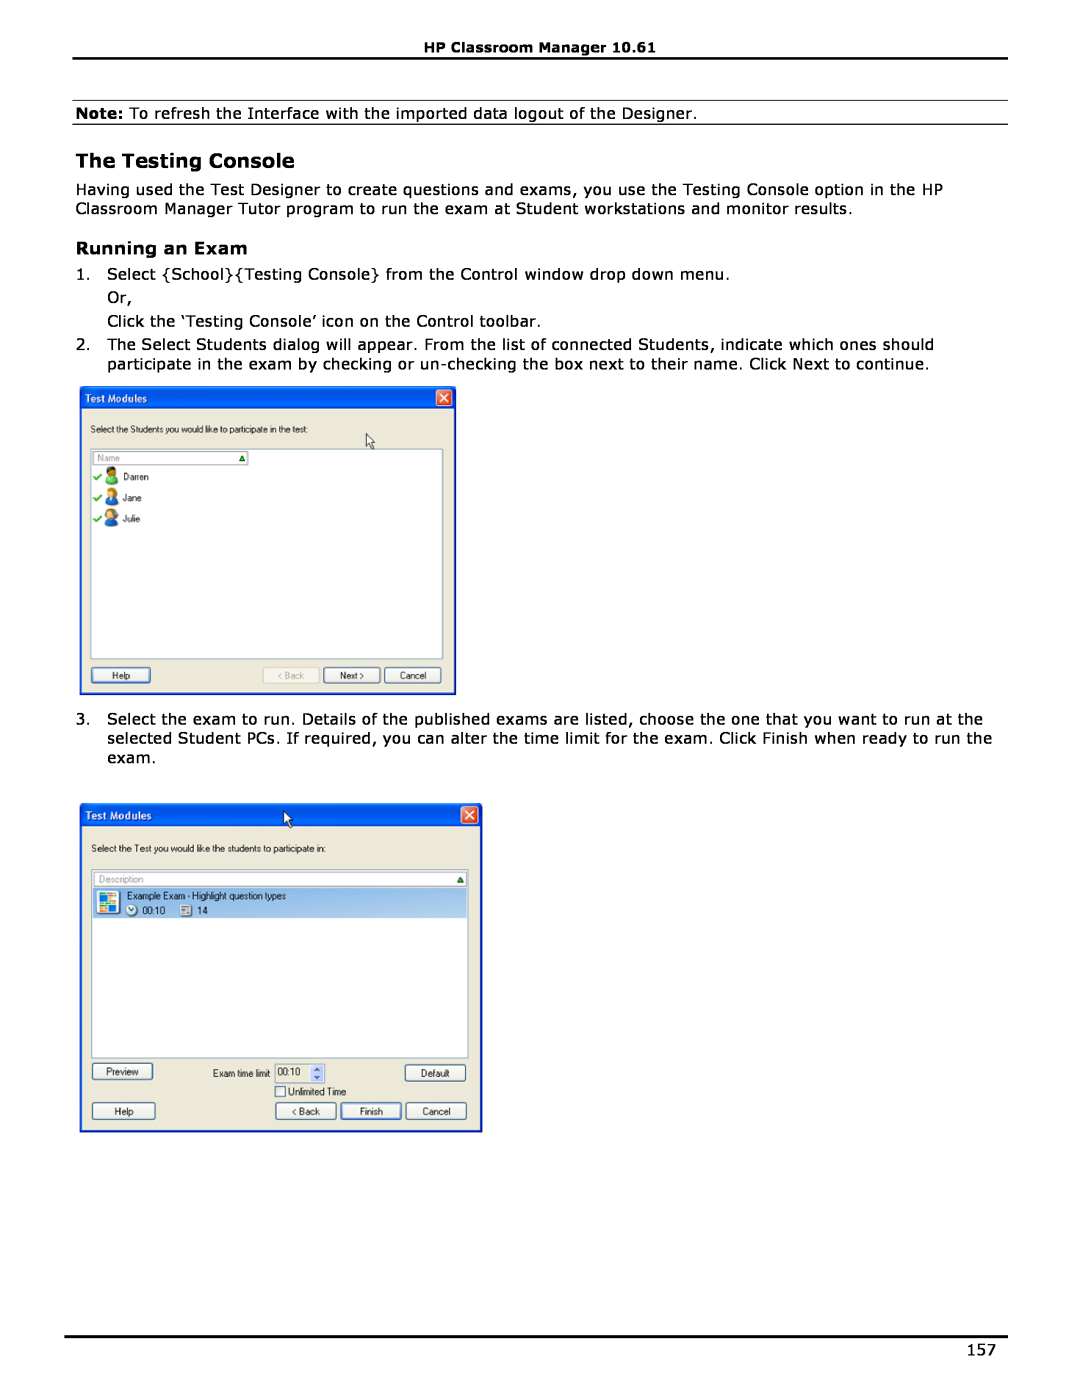 HP Classroom Manager manual The Testing Console, Running an Exam 